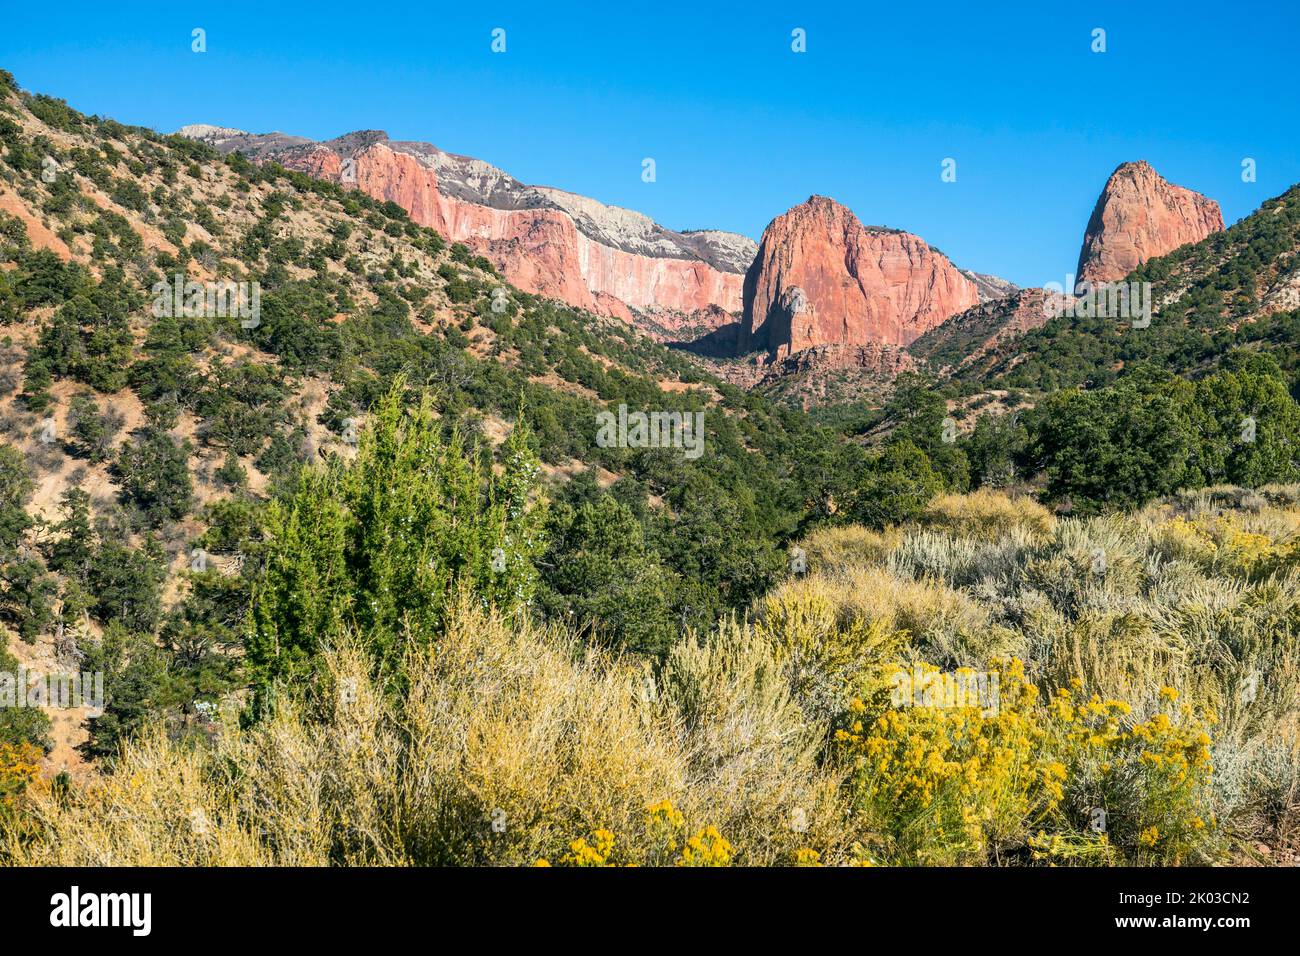 Zion National Park is located in southwestern Utah on the border with Arizona. It has an area of 579 kö² and lies between 1128 m and 2660 m altitude. At Taylor Creek different habitats like desert, floodplain forest, forest and conifer forest show up. Stock Photo